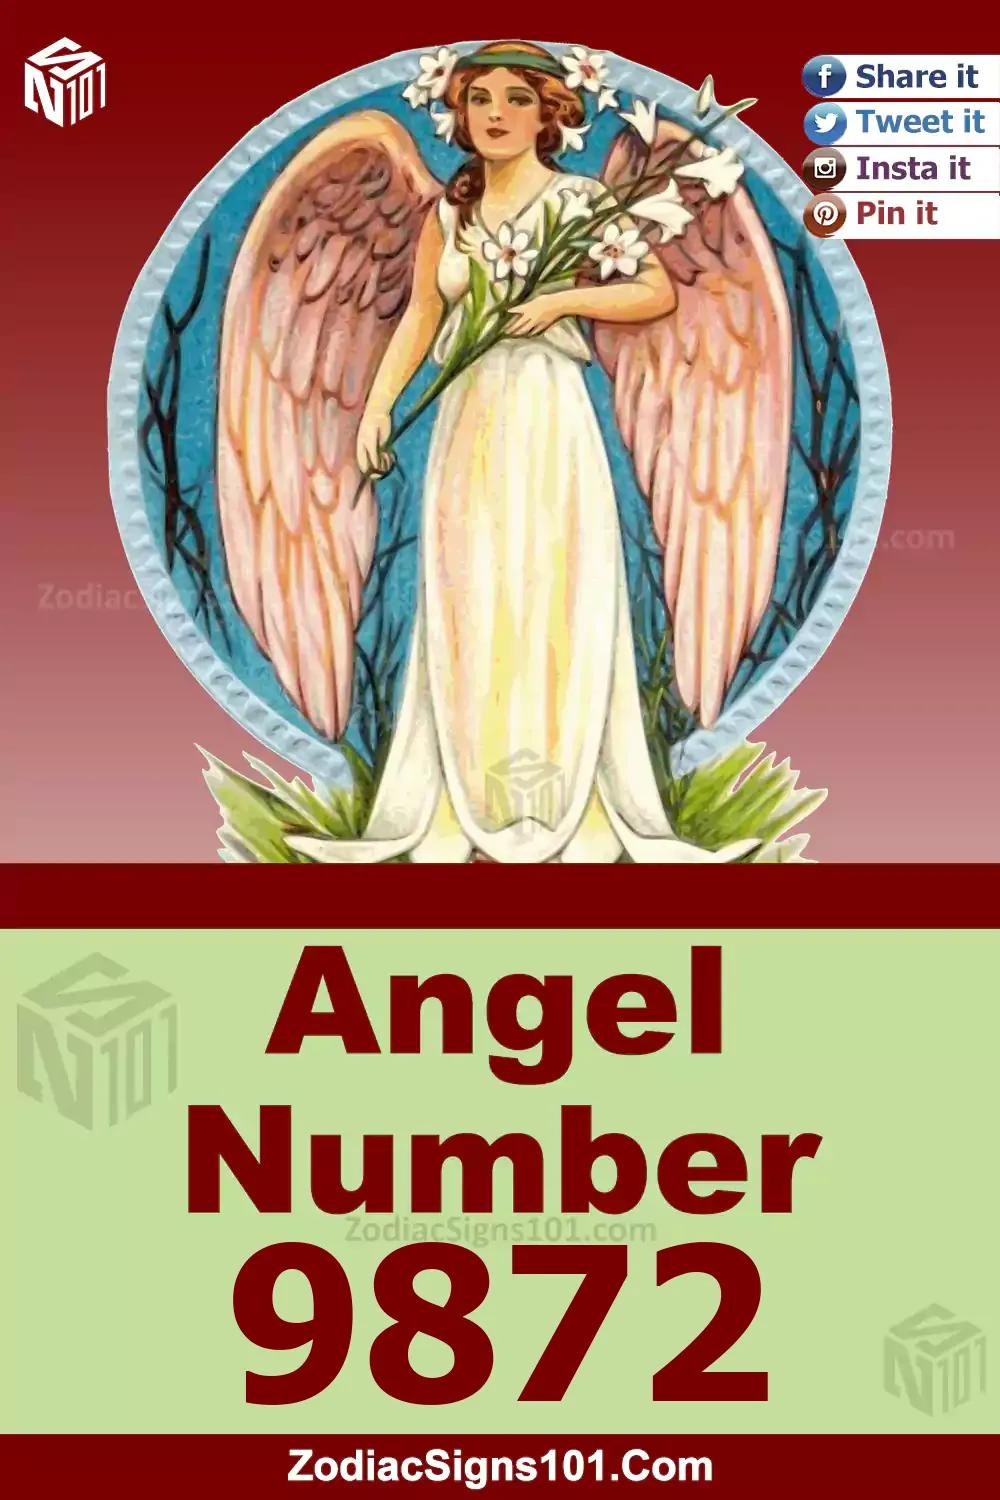 9872 Angel Number Meaning